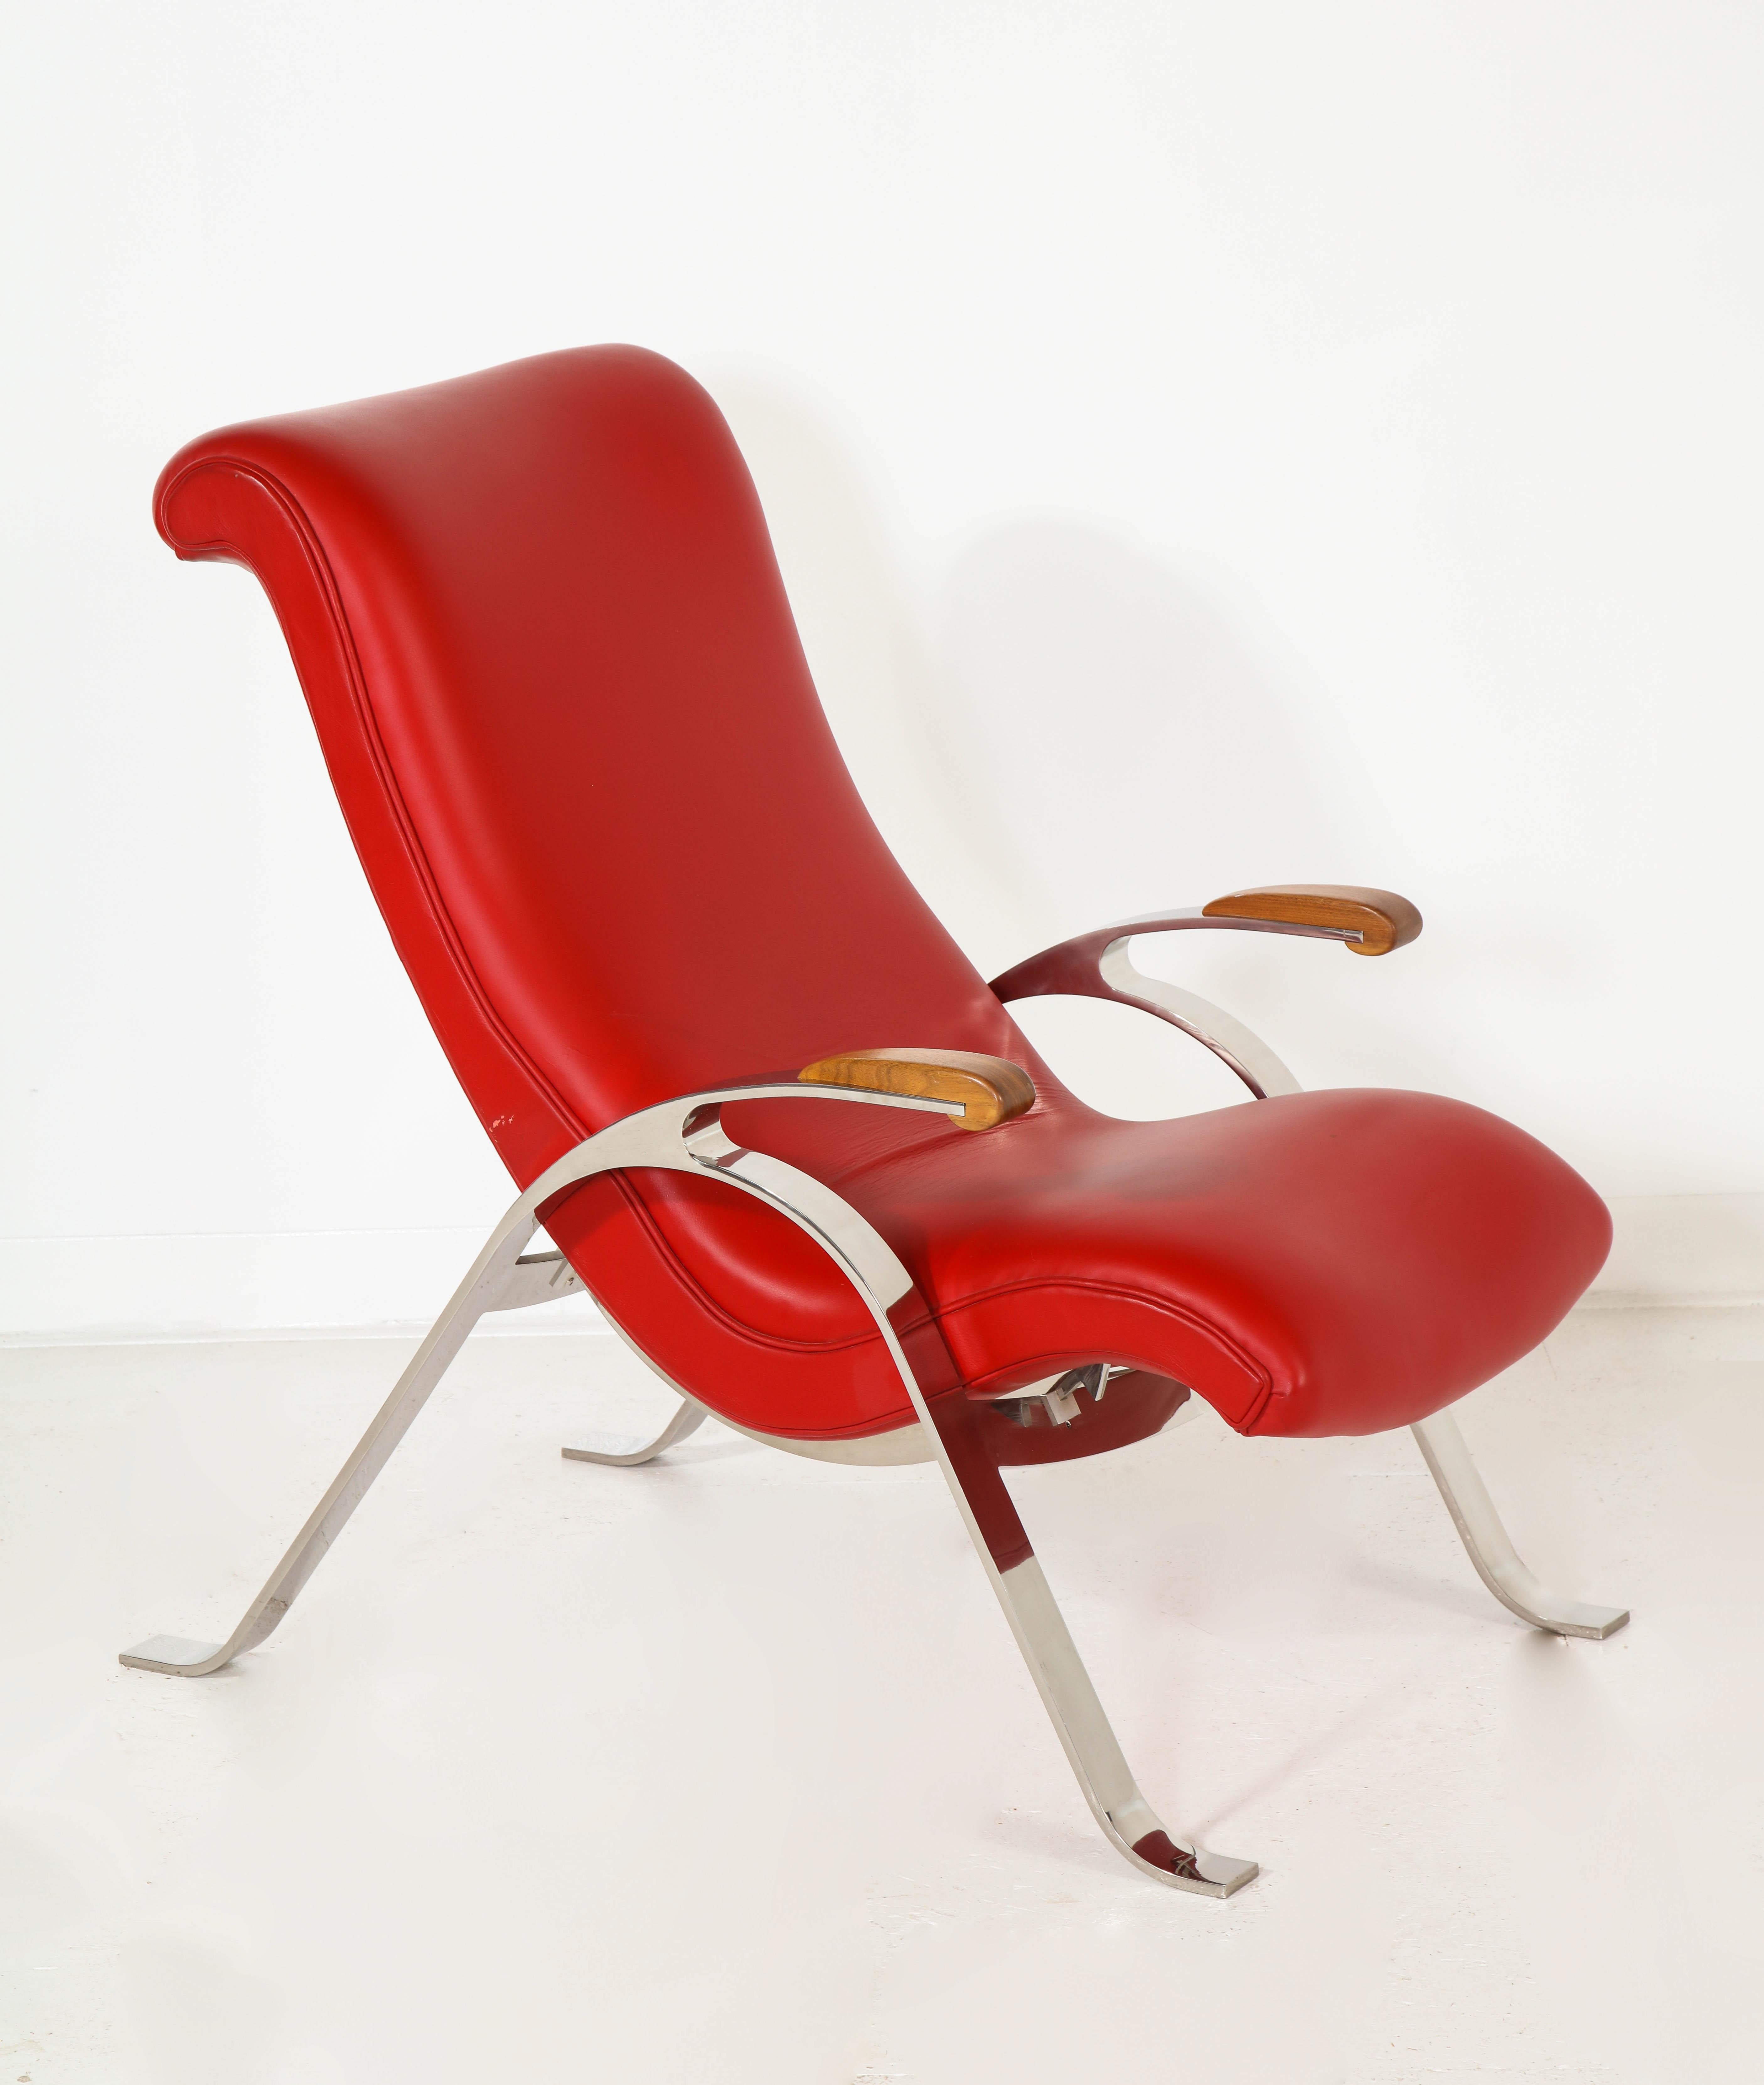 Multi-Position Reclining Chair in Red Offered by Vladimir Kagan Design Group For Sale 5